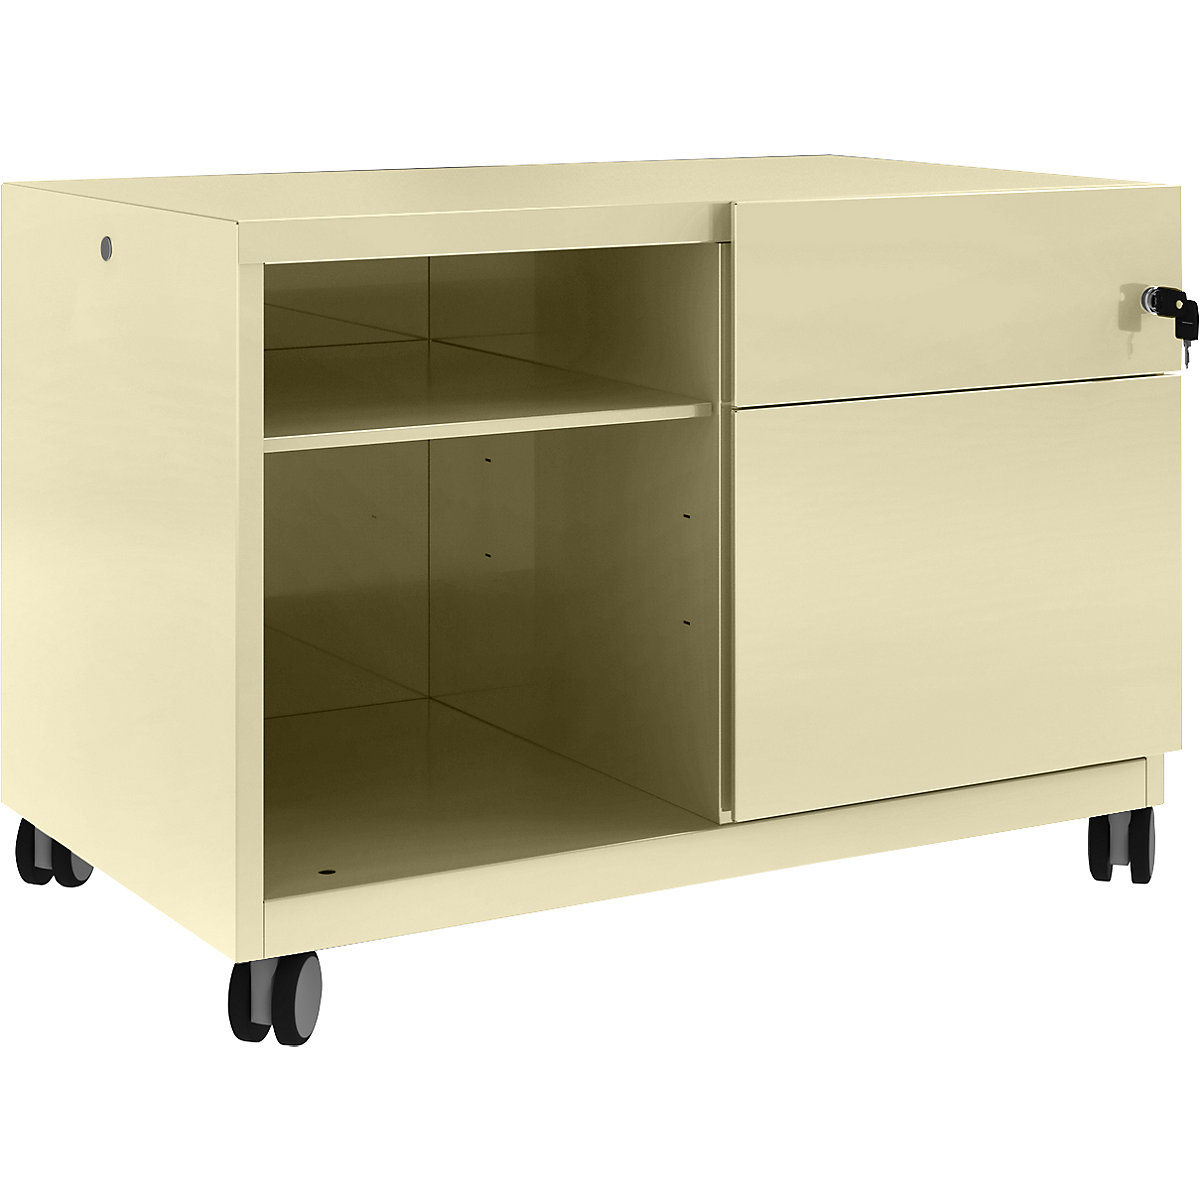 Note™ CADDY, HxBxT 563 x 800 x 490 mm – BISLEY, 1 universal drawer and suspension file drawer on the right, cream-27